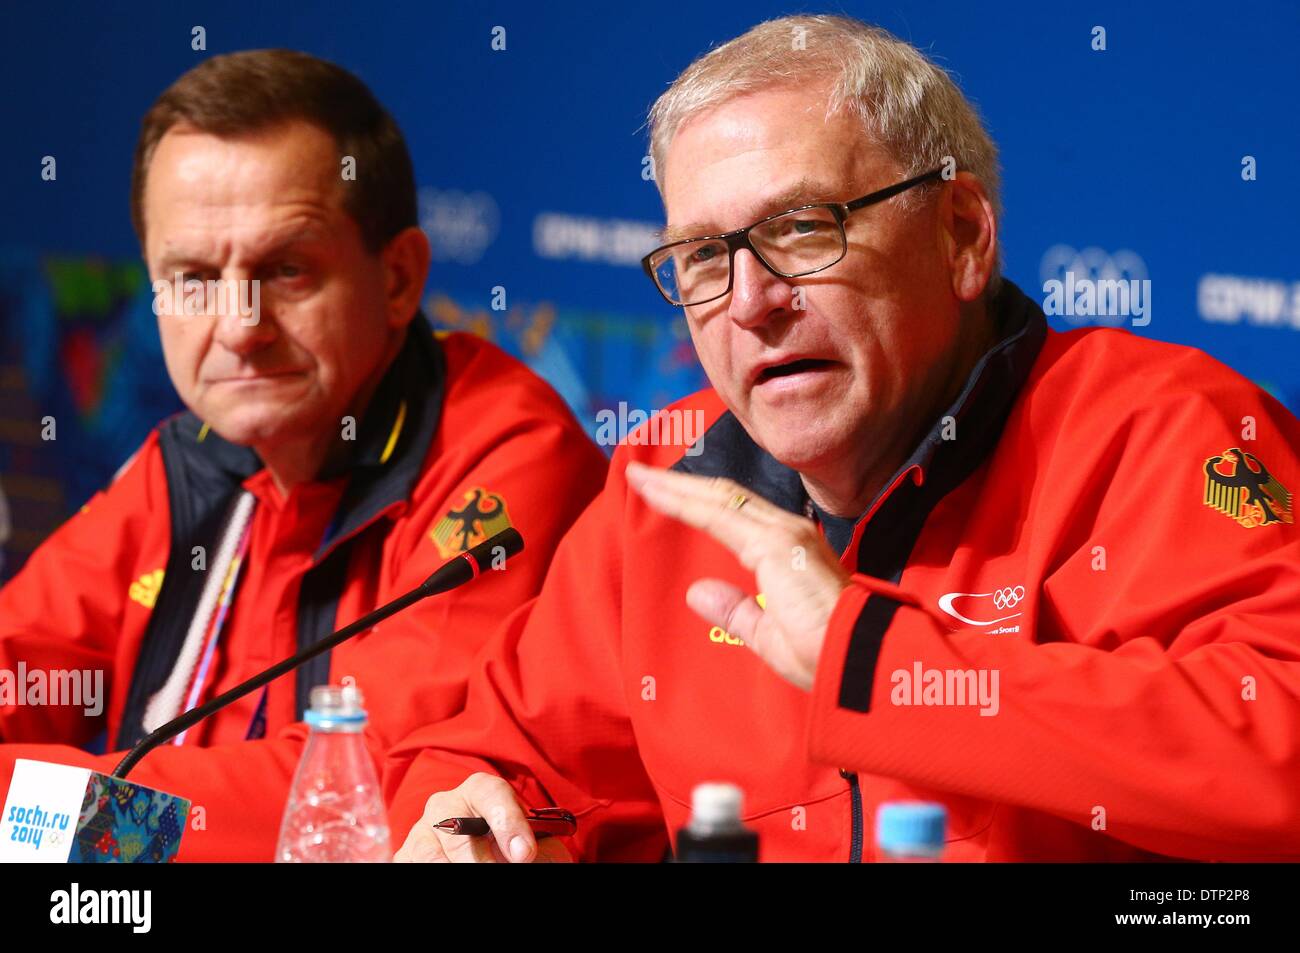 Alfons Hoermann (L), president of the German Olympic Sports Confederation (DOSB) and Michael Vesper, Chef de Mission of the team Germany attend a press conference at the Main Media Center (MPC) at the Sochi 2014 Olympic Games, Sochi, Russia, 22 February 2014. Photo: Christian Charisius/dpa Stock Photo